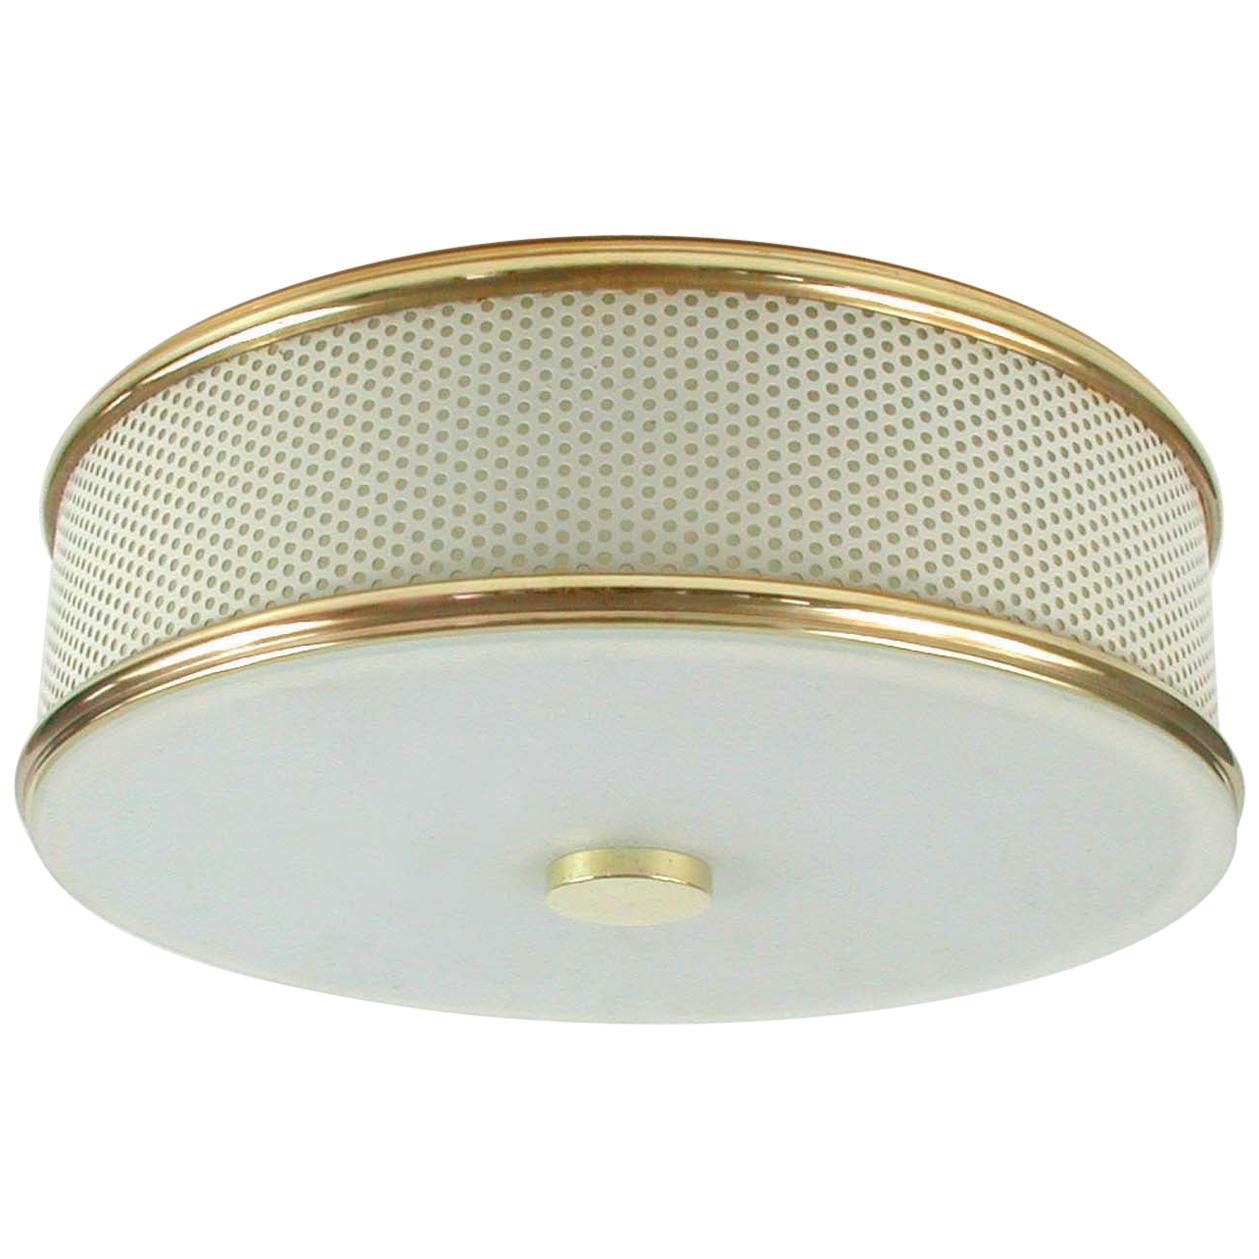 This stylish perforated flush mount / light fixture was designed and manufactured in France in the 1950s. Since the French designer Mathieu Matégot preferred to work with perforated metal this became very popular.

The light is partially restored,